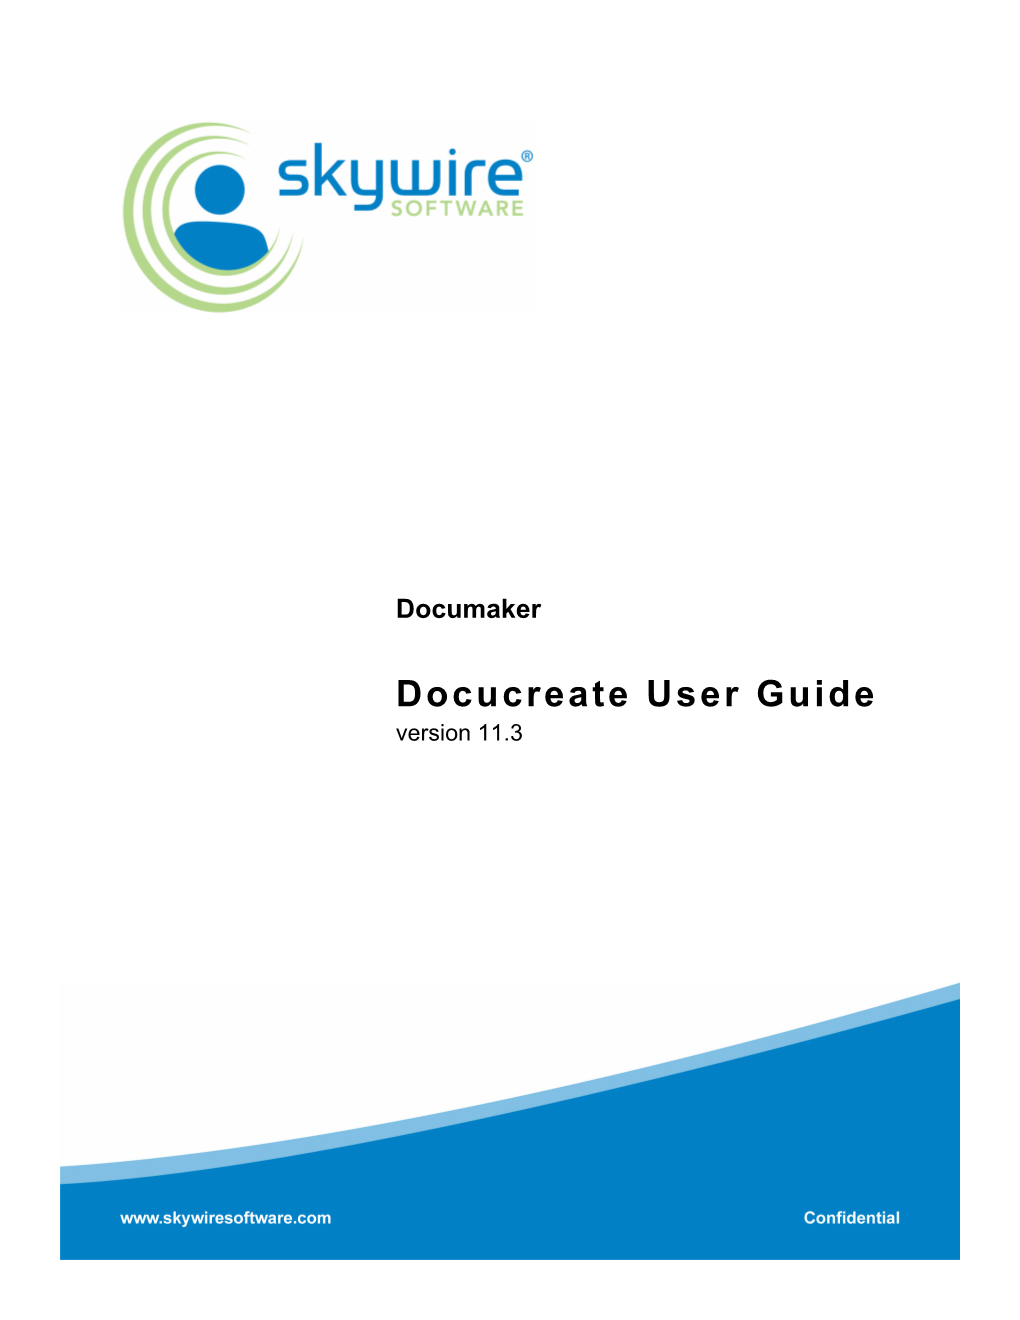 Docucreate User Guide Version 11.3 Skywire Software, L.L.C